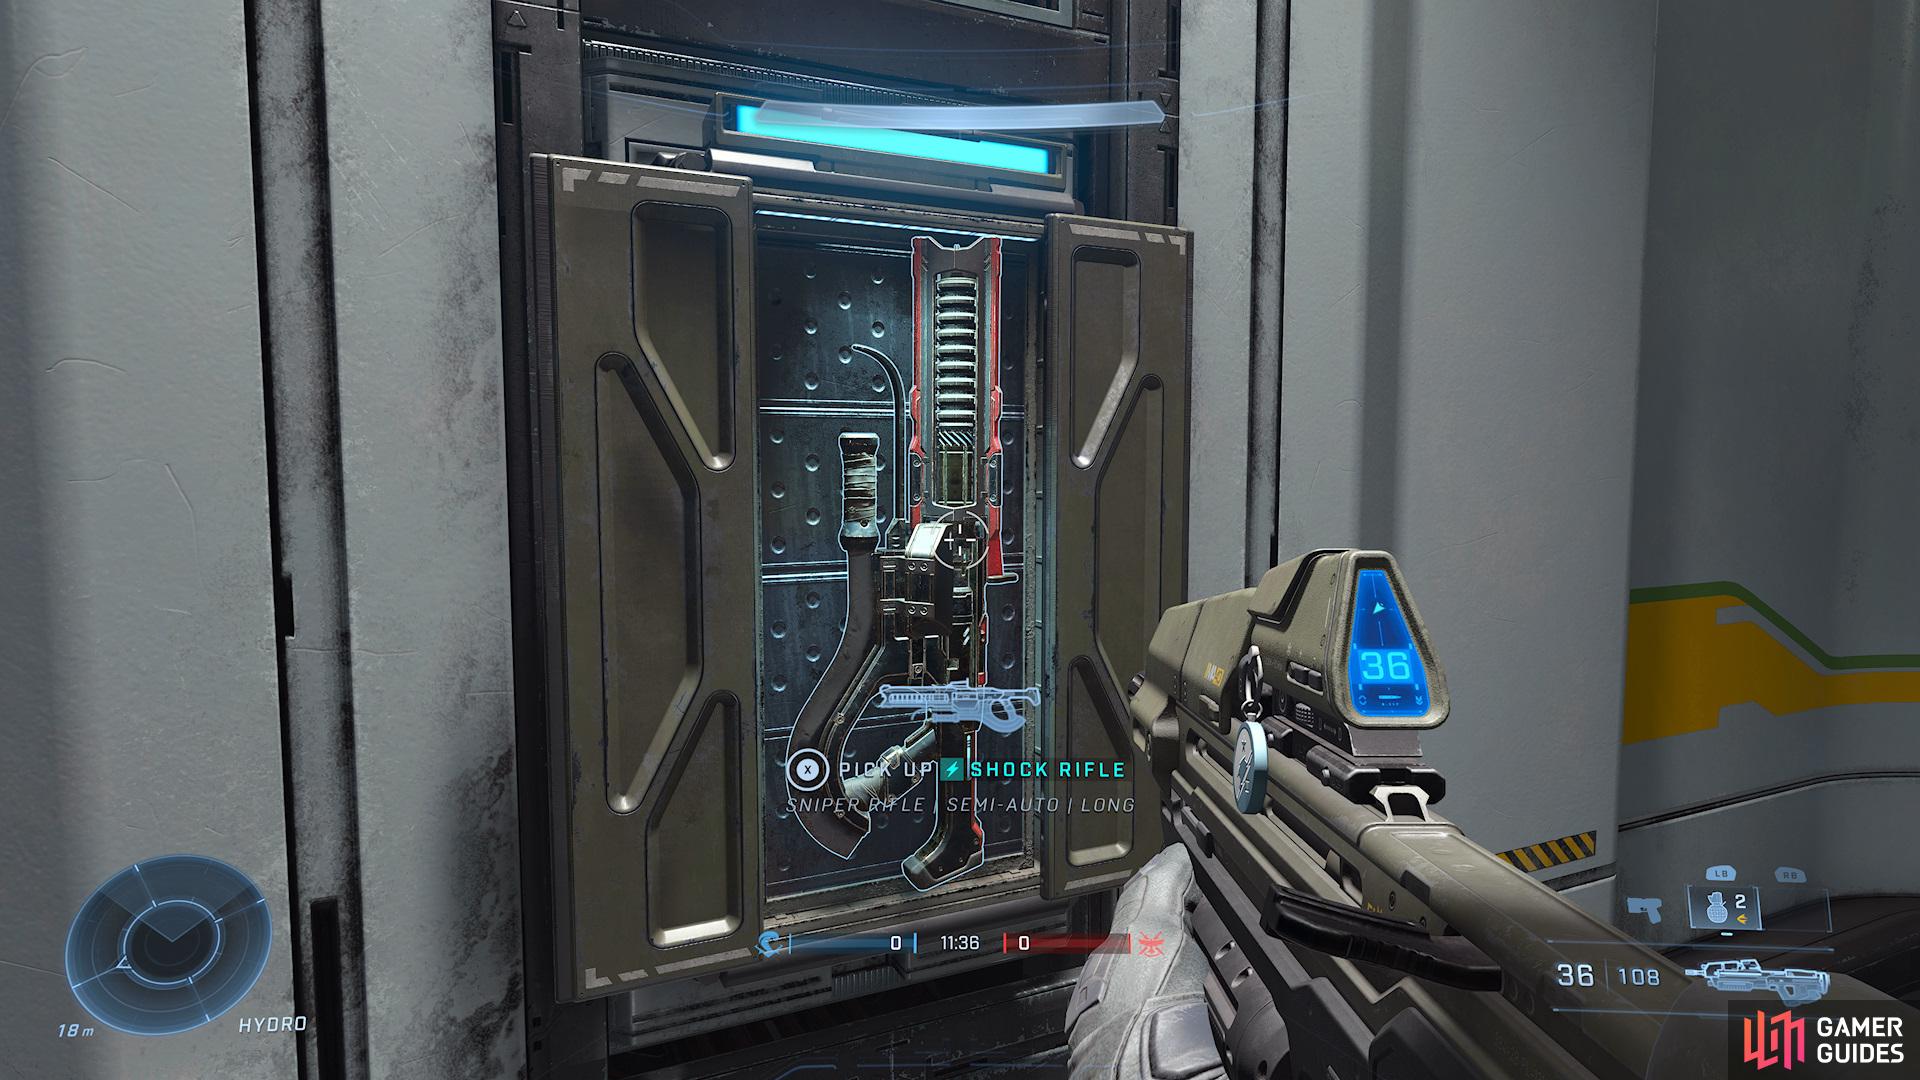 The Energy Rifle can be found in the Hydro Area